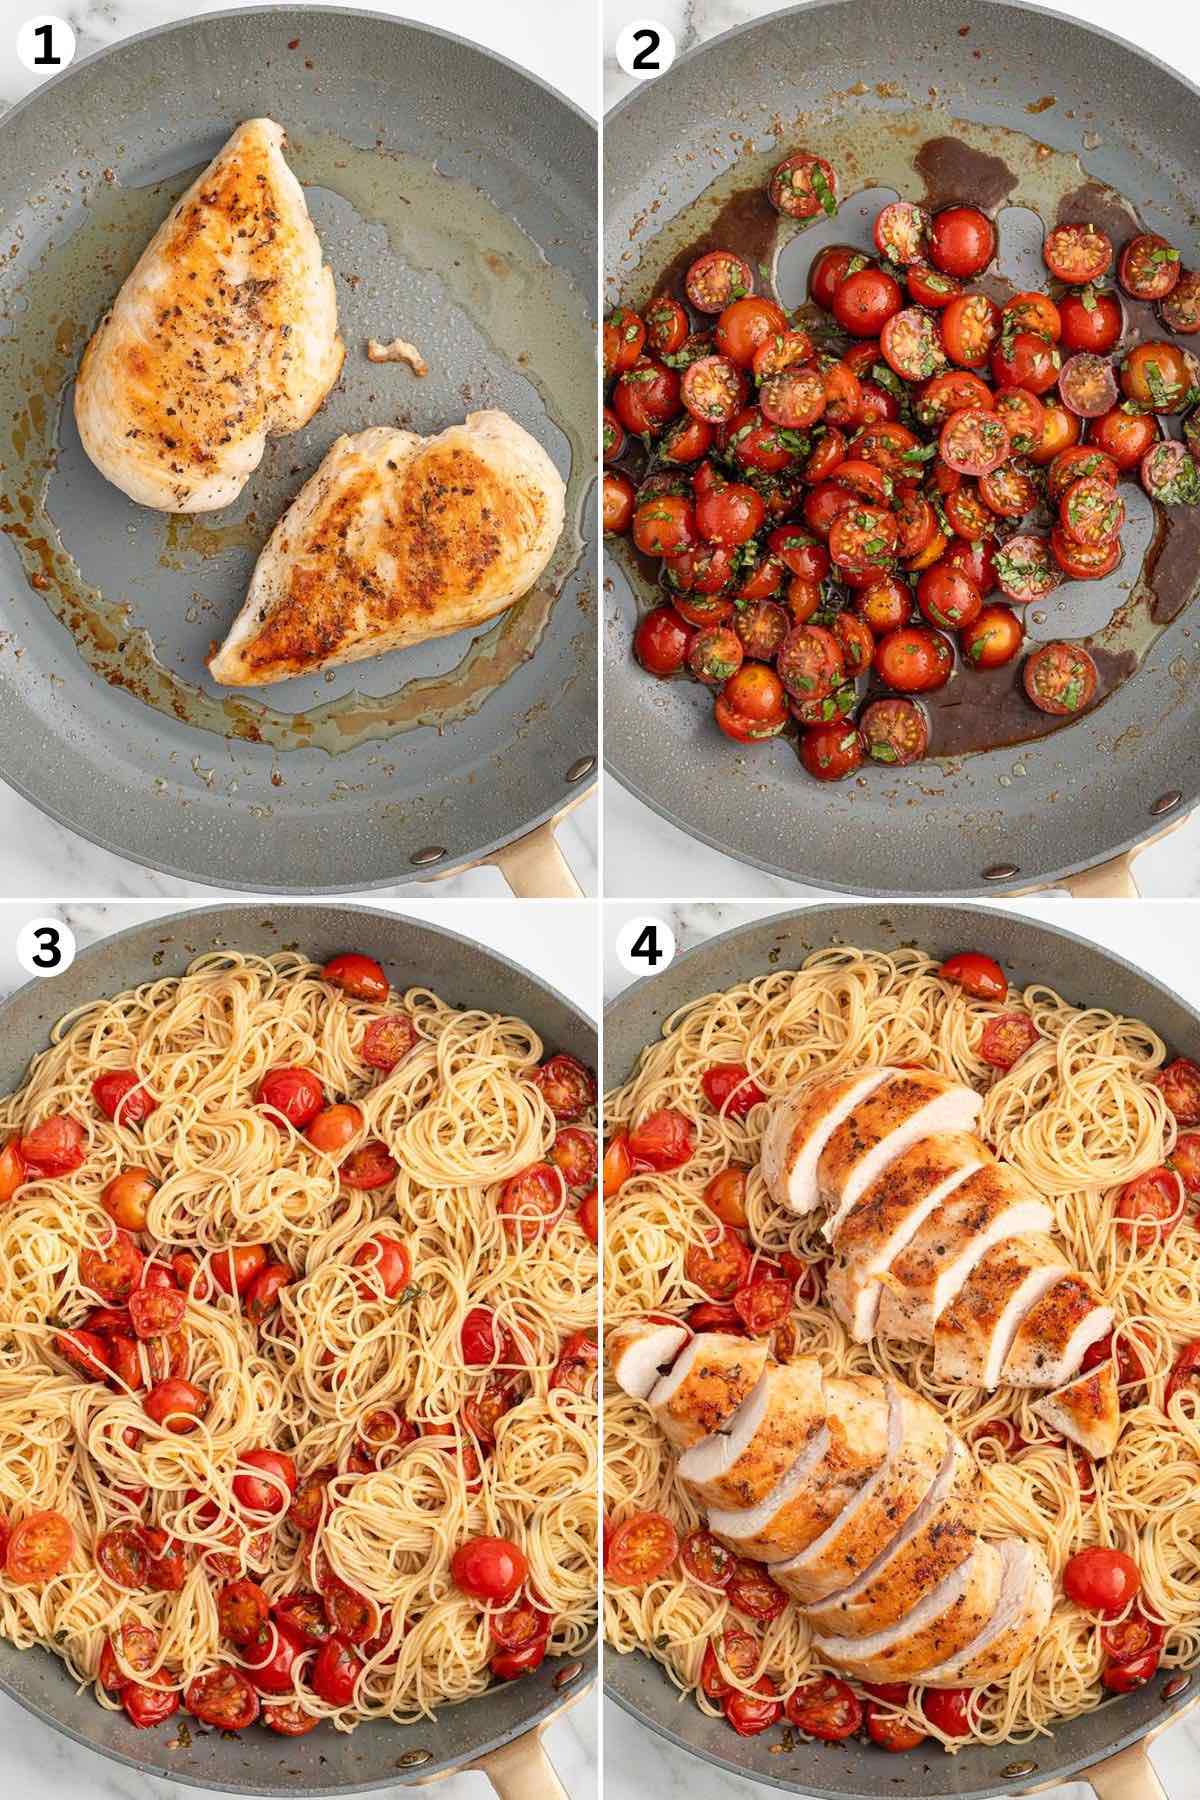 cook the chicken breast. make the bruschetta in the pan. add the angel hair pasta. add the chicken into the pan. 